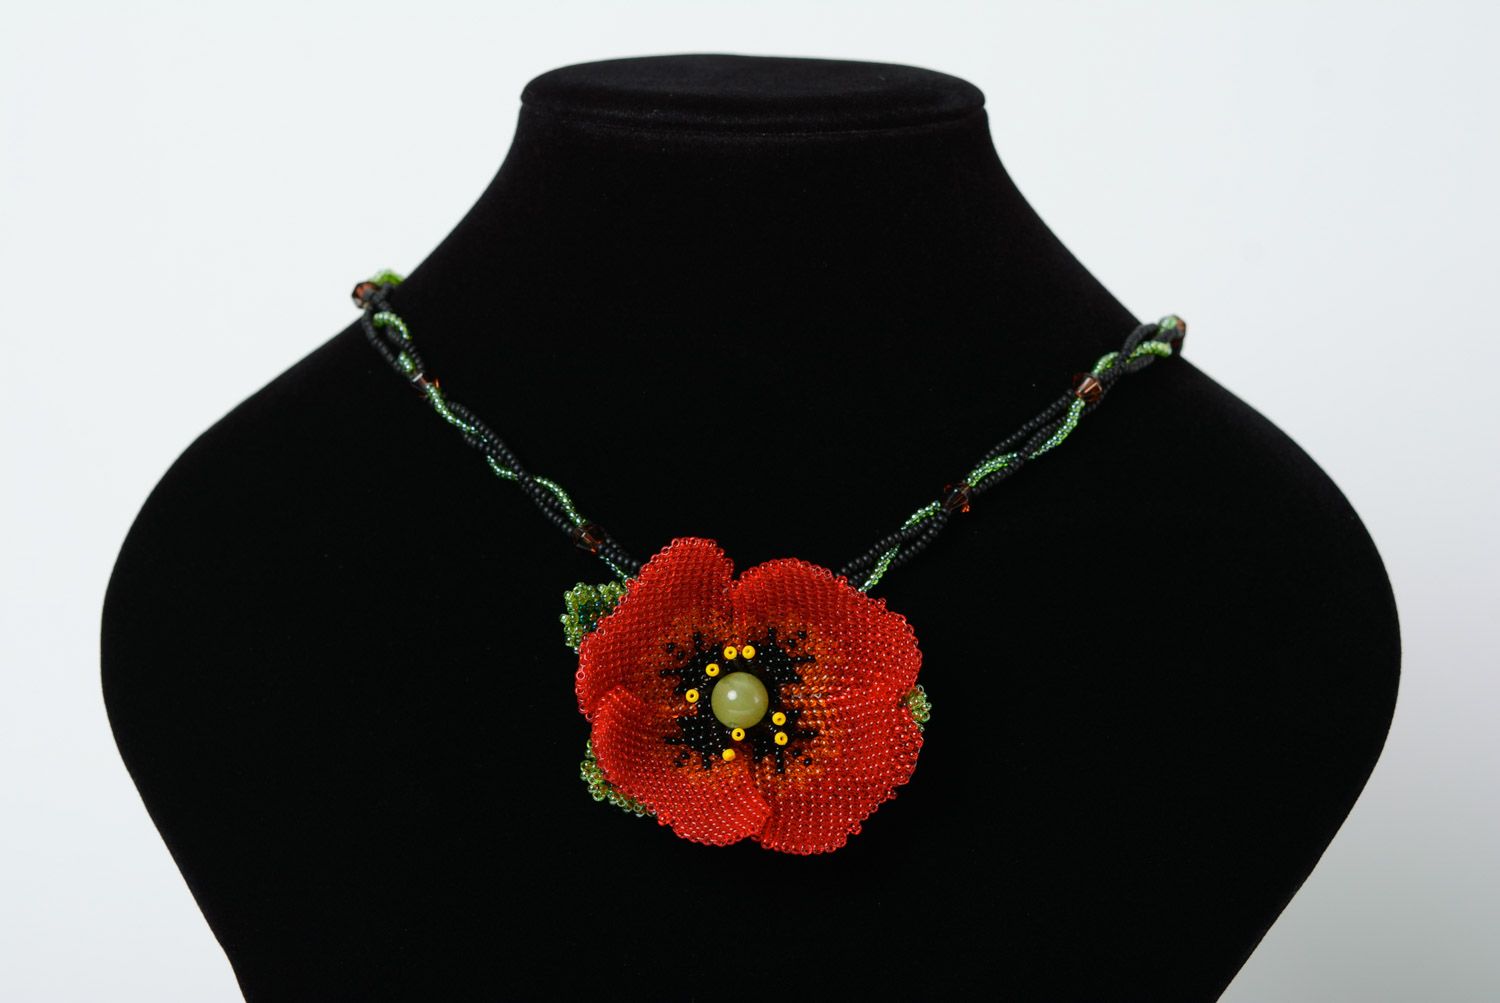 Handmade magnificent long necklace woven of beads in the shape of poppy flower photo 2